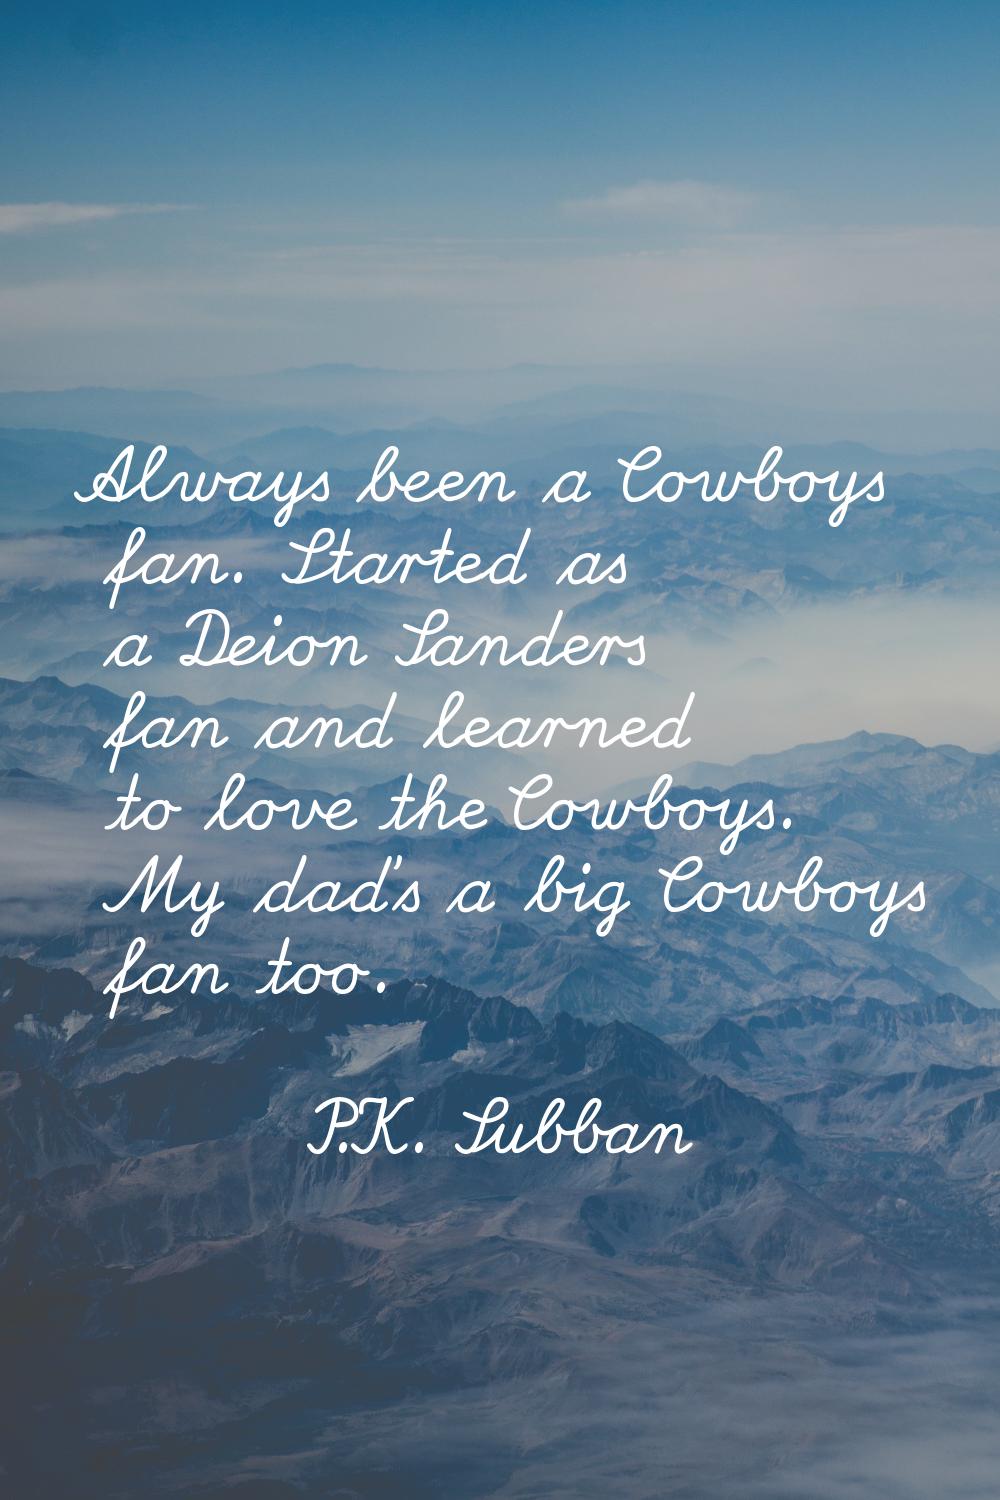 Always been a Cowboys fan. Started as a Deion Sanders fan and learned to love the Cowboys. My dad's